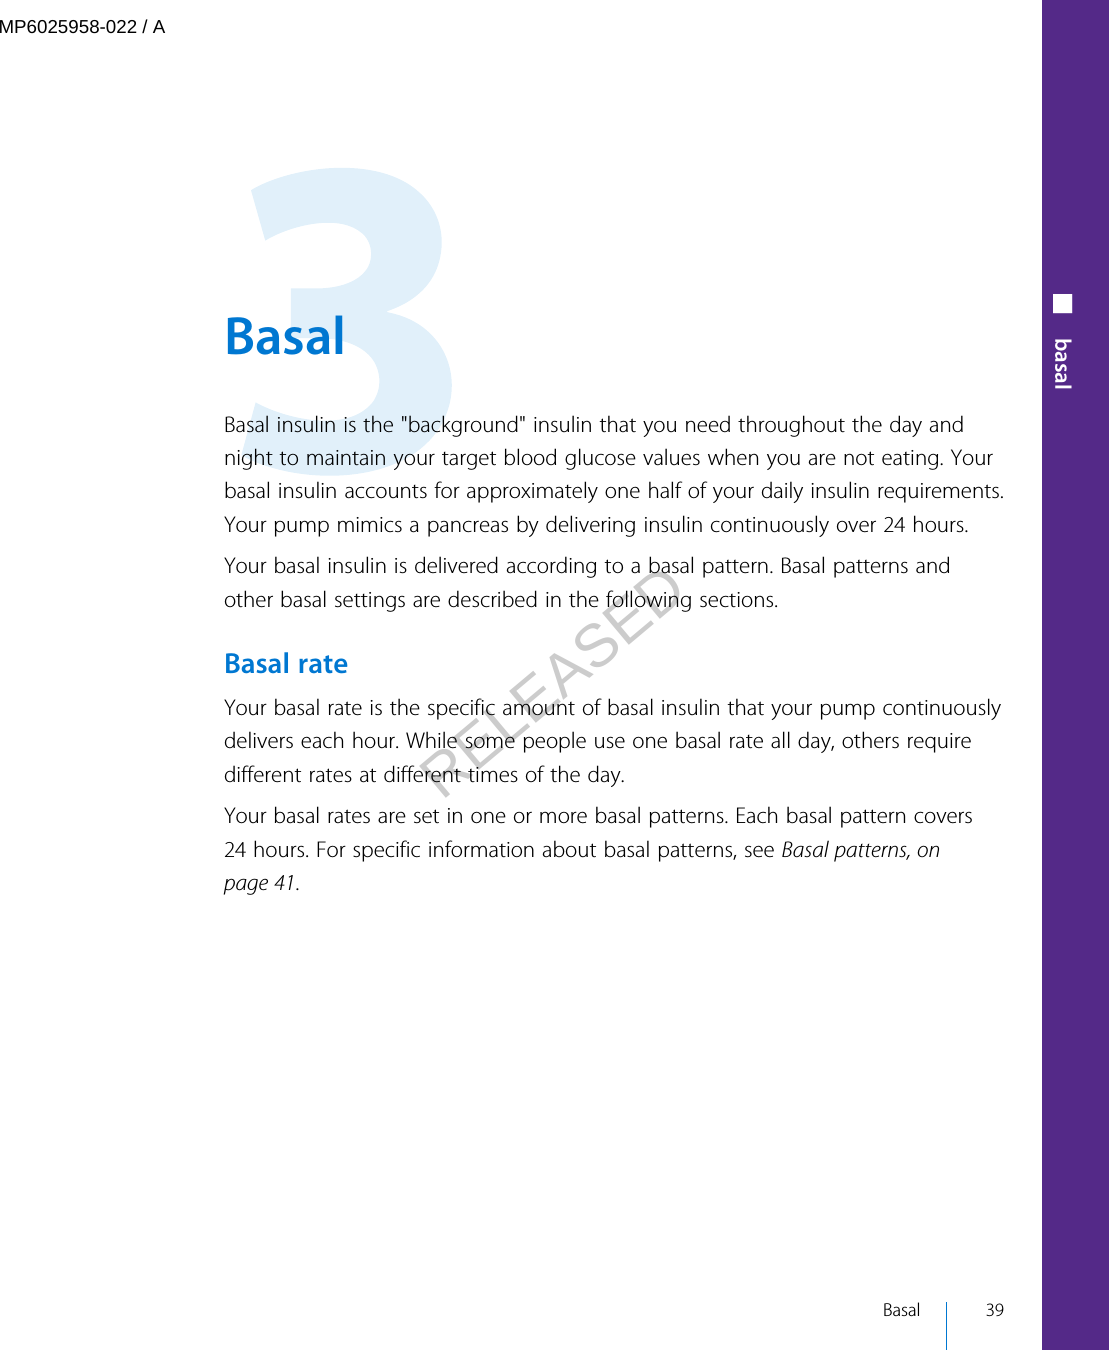  BasalBasal insulin is the &quot;background&quot; insulin that you need throughout the day andnight to maintain your target blood glucose values when you are not eating. Yourbasal insulin accounts for approximately one half of your daily insulin requirements.Your pump mimics a pancreas by delivering insulin continuously over 24 hours.Your basal insulin is delivered according to a basal pattern. Basal patterns andother basal settings are described in the following sections.Basal rateYour basal rate is the specific amount of basal insulin that your pump continuouslydelivers each hour. While some people use one basal rate all day, others requiredifferent rates at different times of the day.Your basal rates are set in one or more basal patterns. Each basal pattern covers24 hours. For specific information about basal patterns, see Basal patterns, onpage 41. Basal 39■ basalMP6025958-022 / ARELEASED